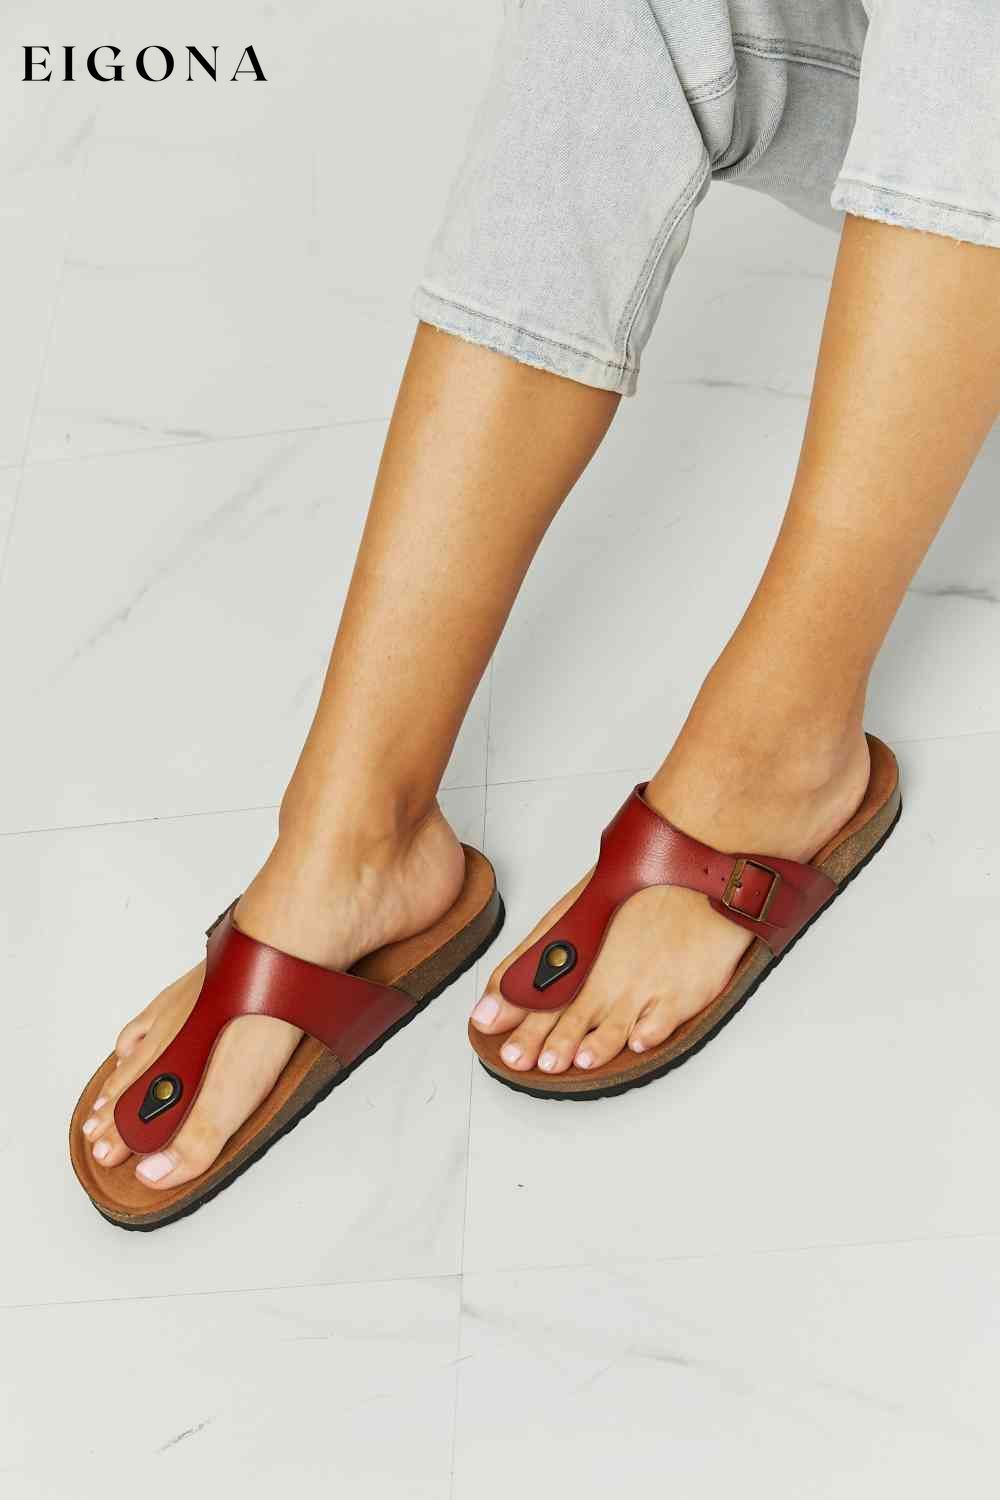 Drift Away T-Strap Flip-Flop in Red Melody Ship from USA shoes womens shoes